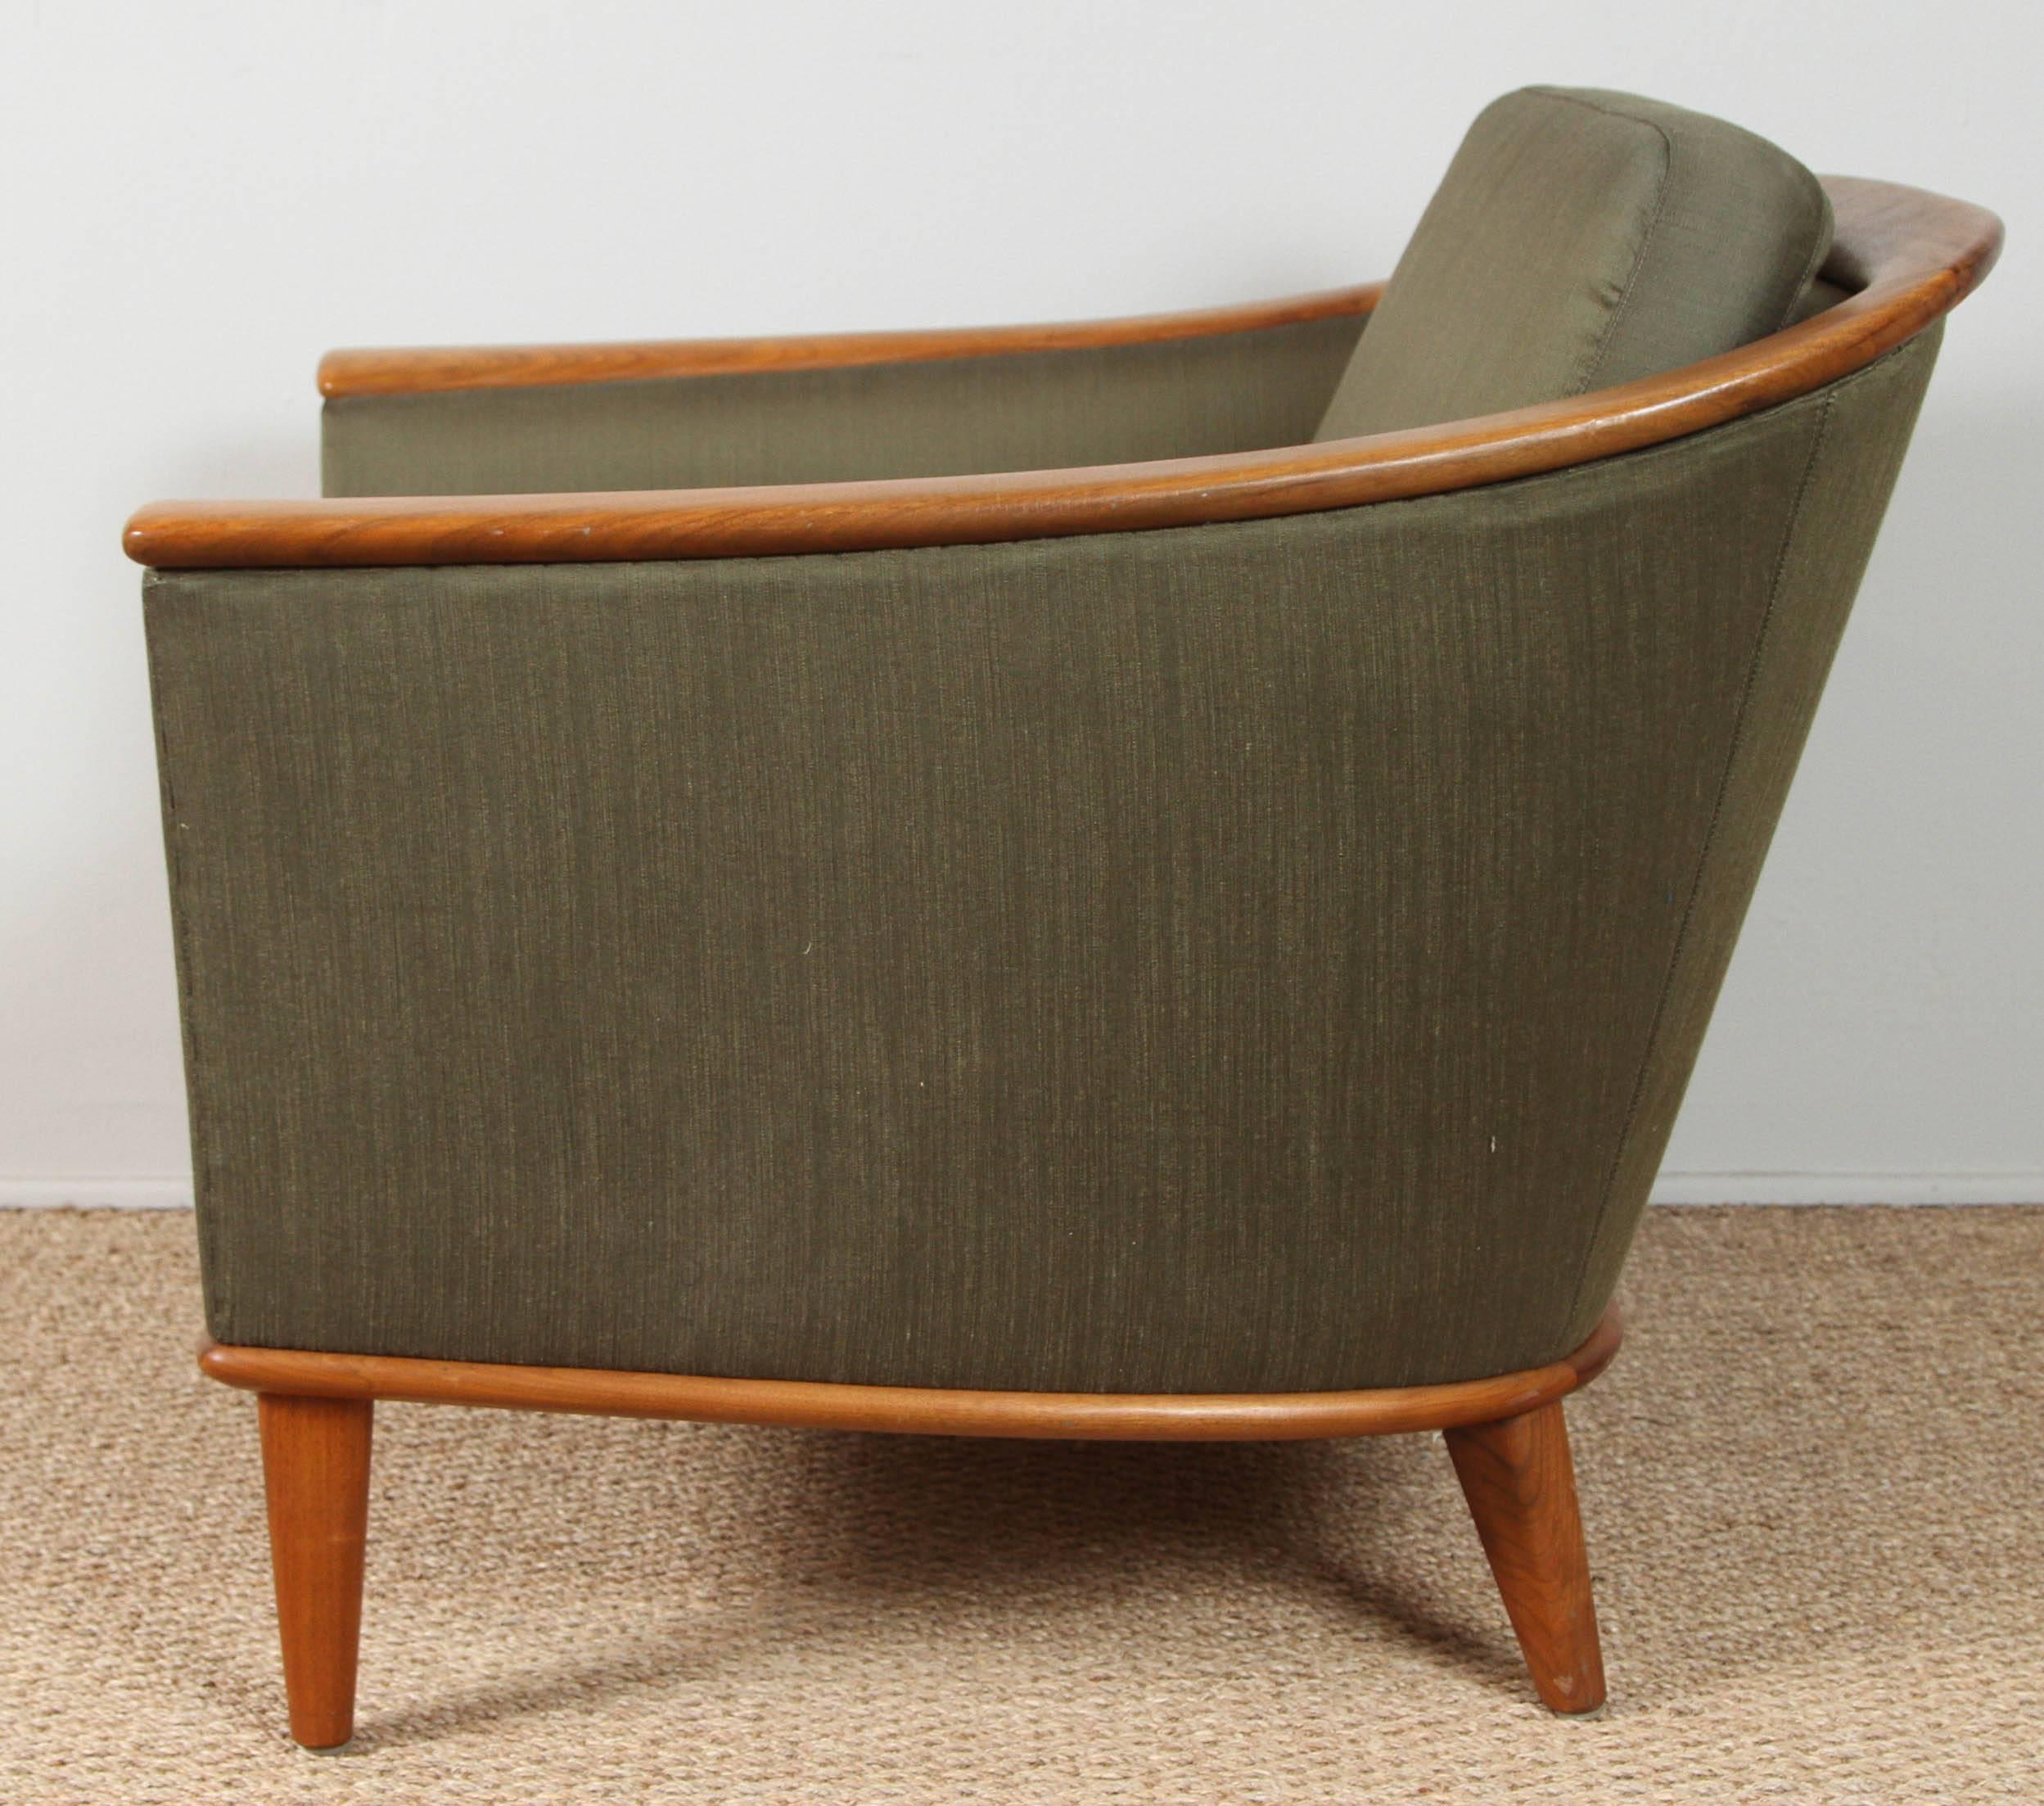 Two available. Original green silk upholstery. Some slight, hidden damage to underside of arm on one chair. Otherwise, condition and finish good. Identifying label underneath as shown in image 9.